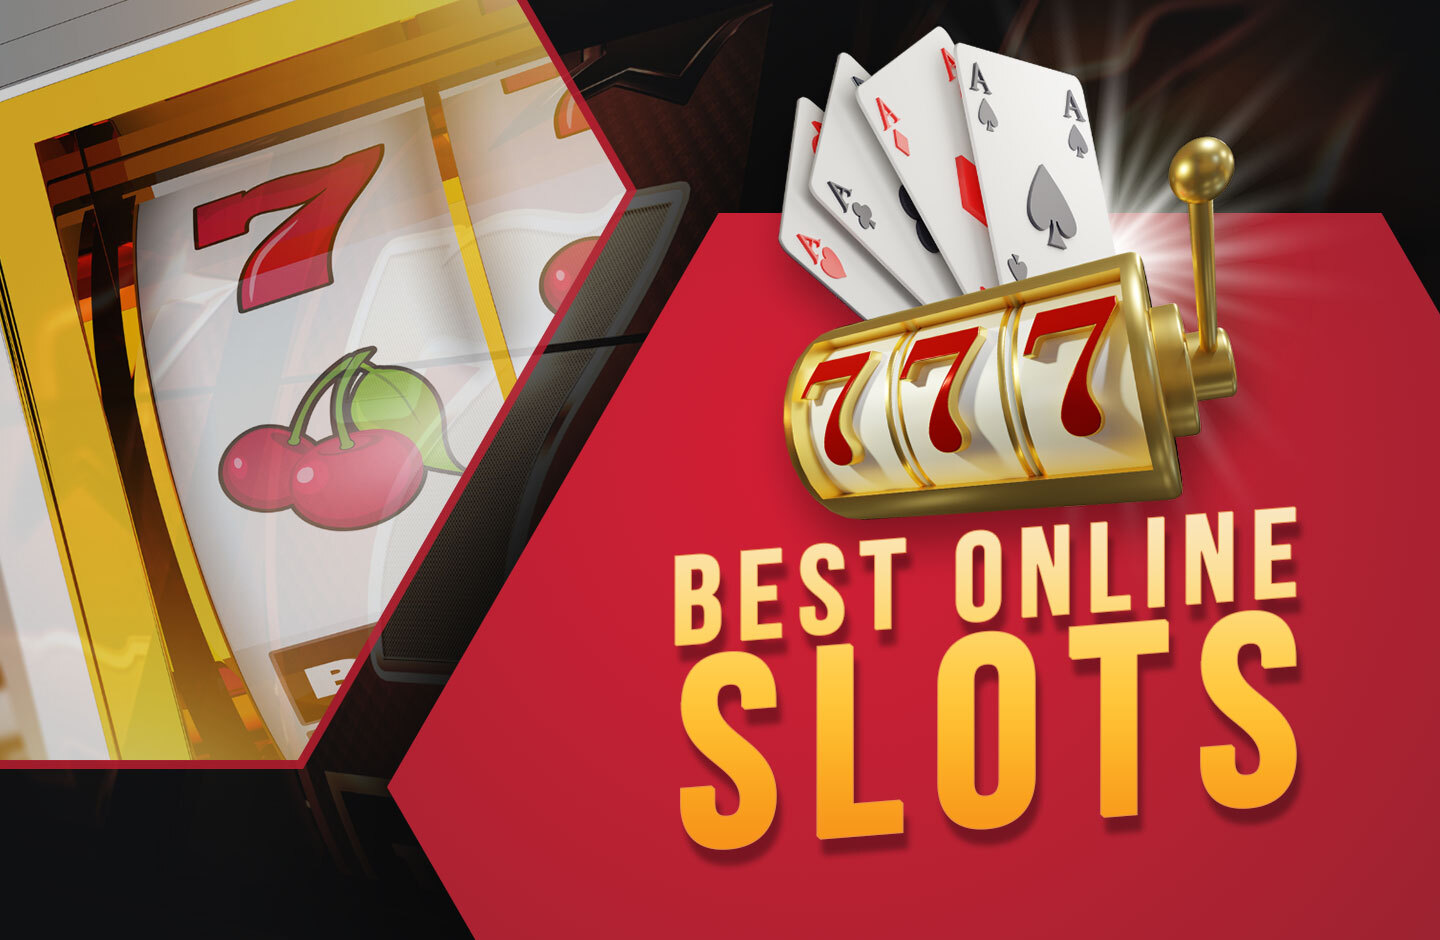 How To Make Your caesars casino online real money Look Amazing In 5 Days